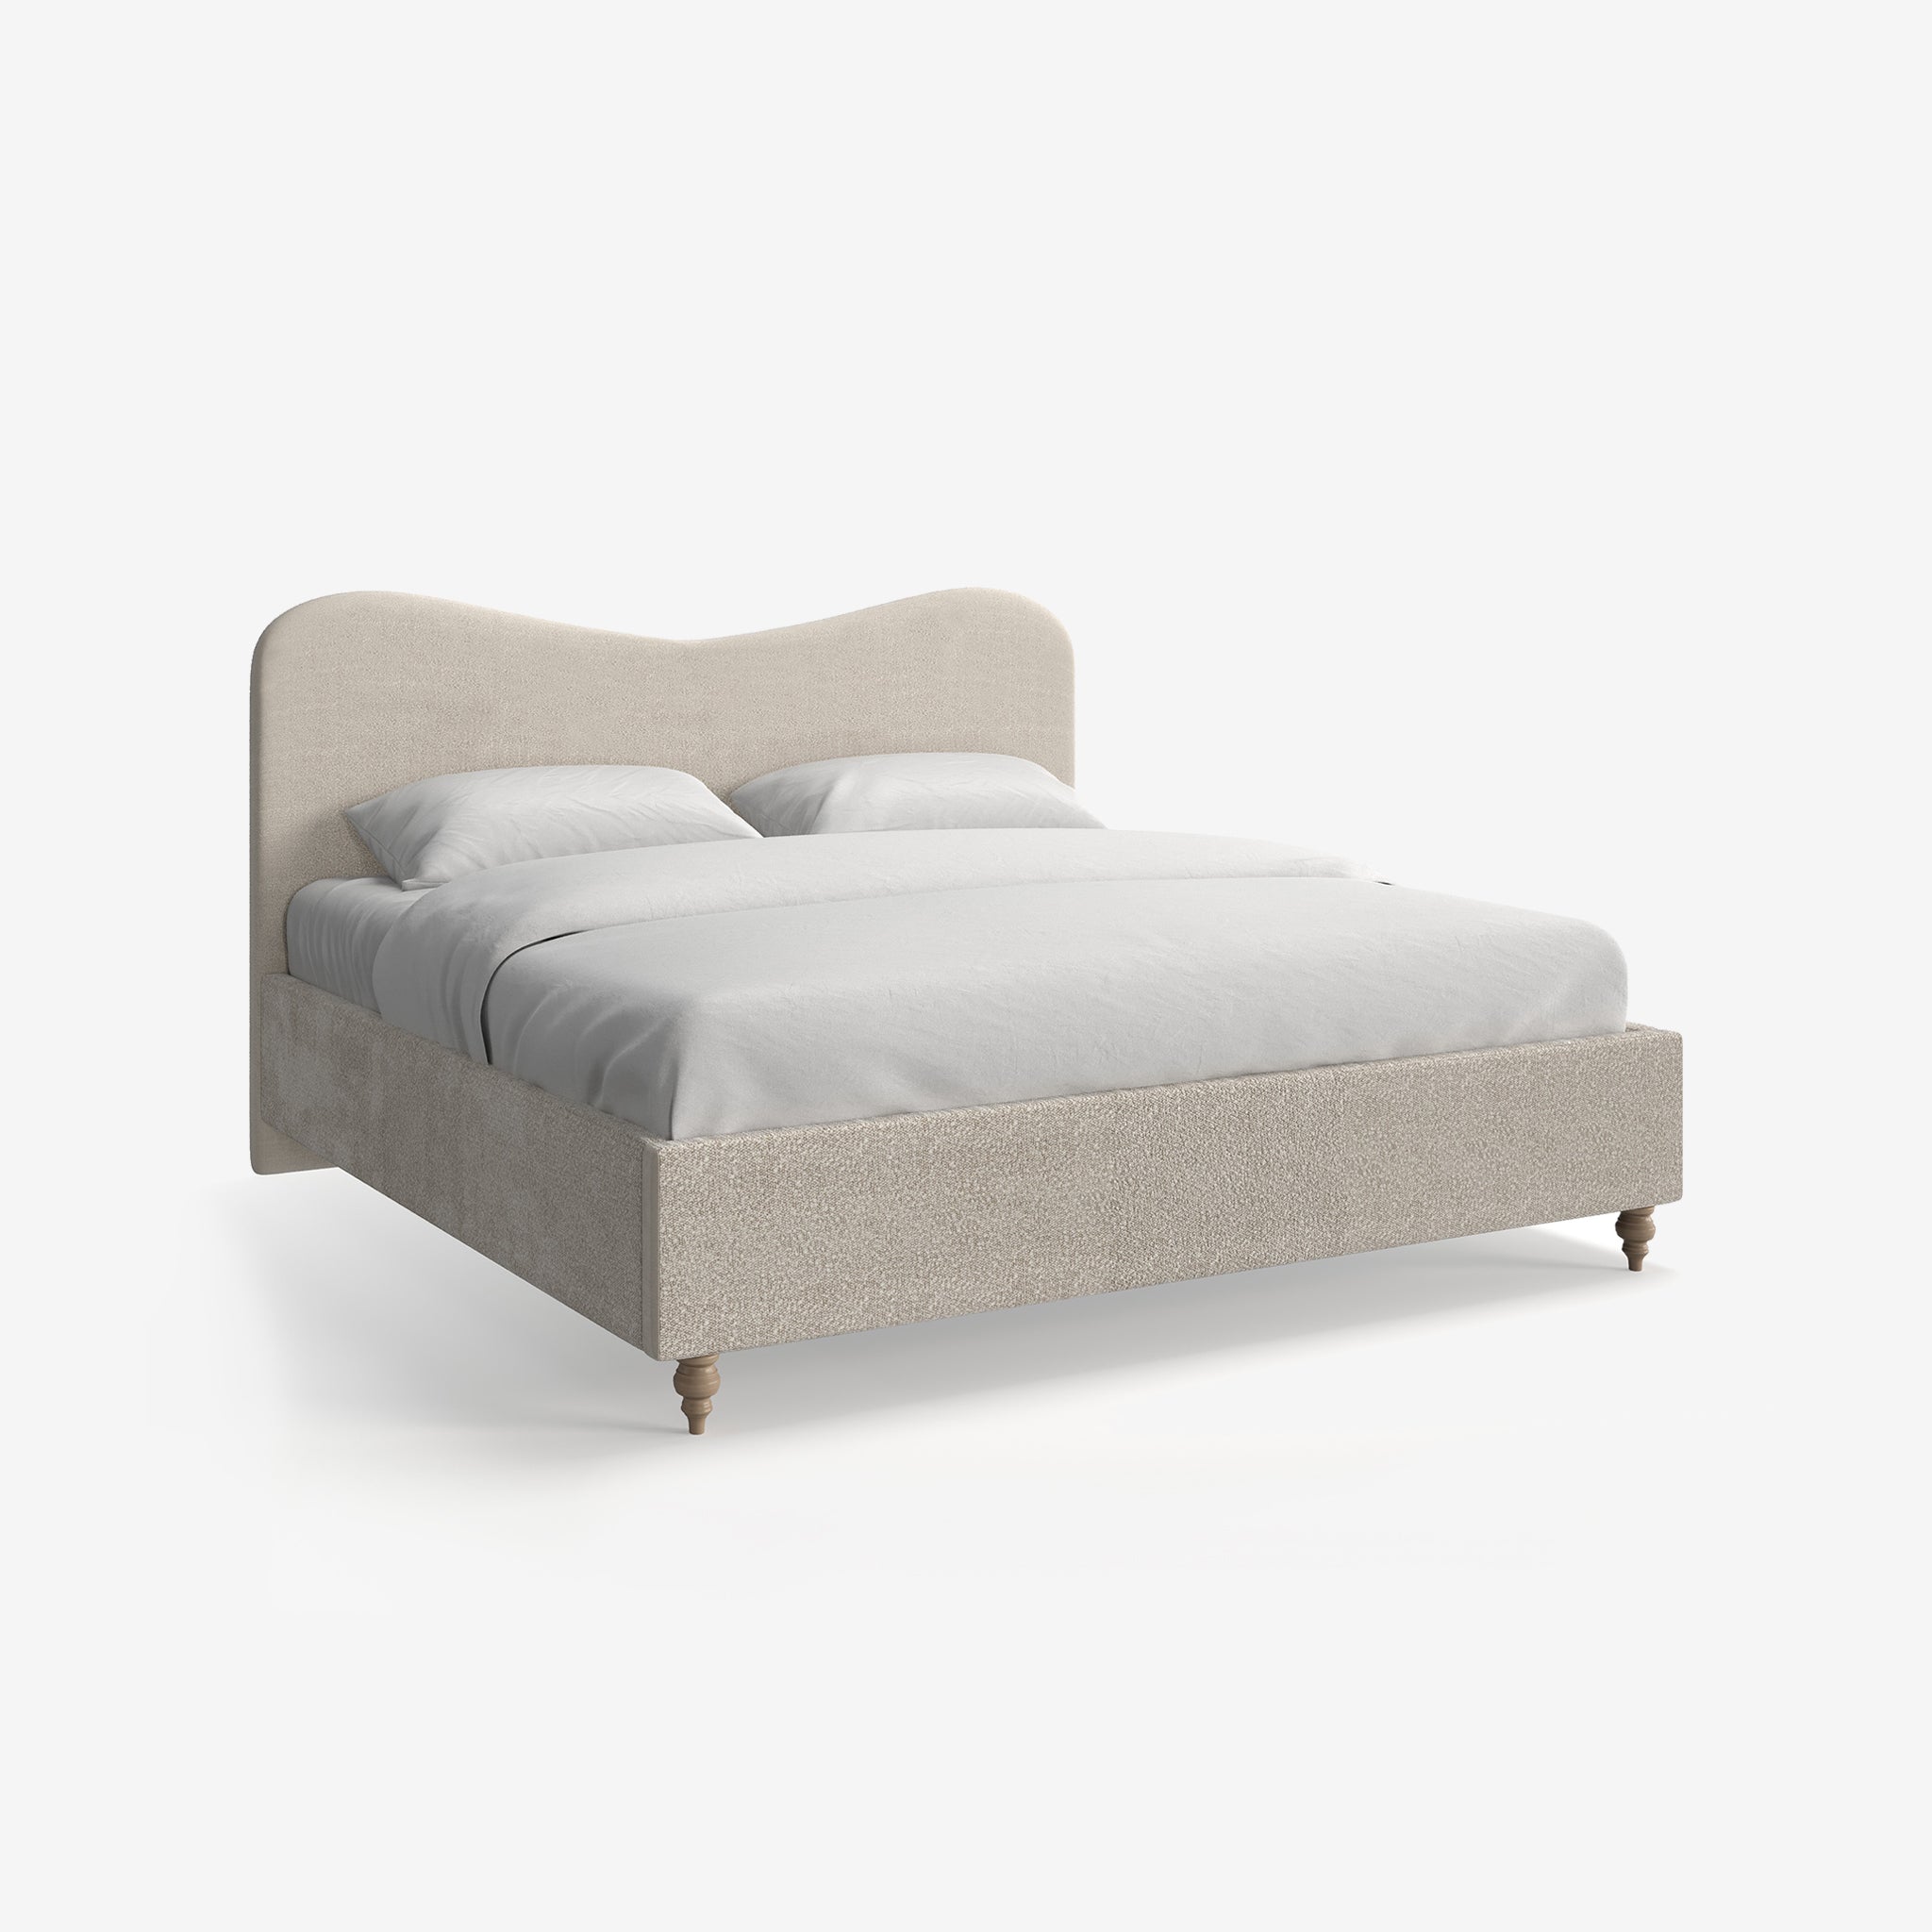 Bozier Beige Boucle Upholstered Bed with Curved Headbaord and end-lift Ottoman Storage, Contemporary Interiors, Online Shopping, Craftsmanship, Wooden feet, Bazaar